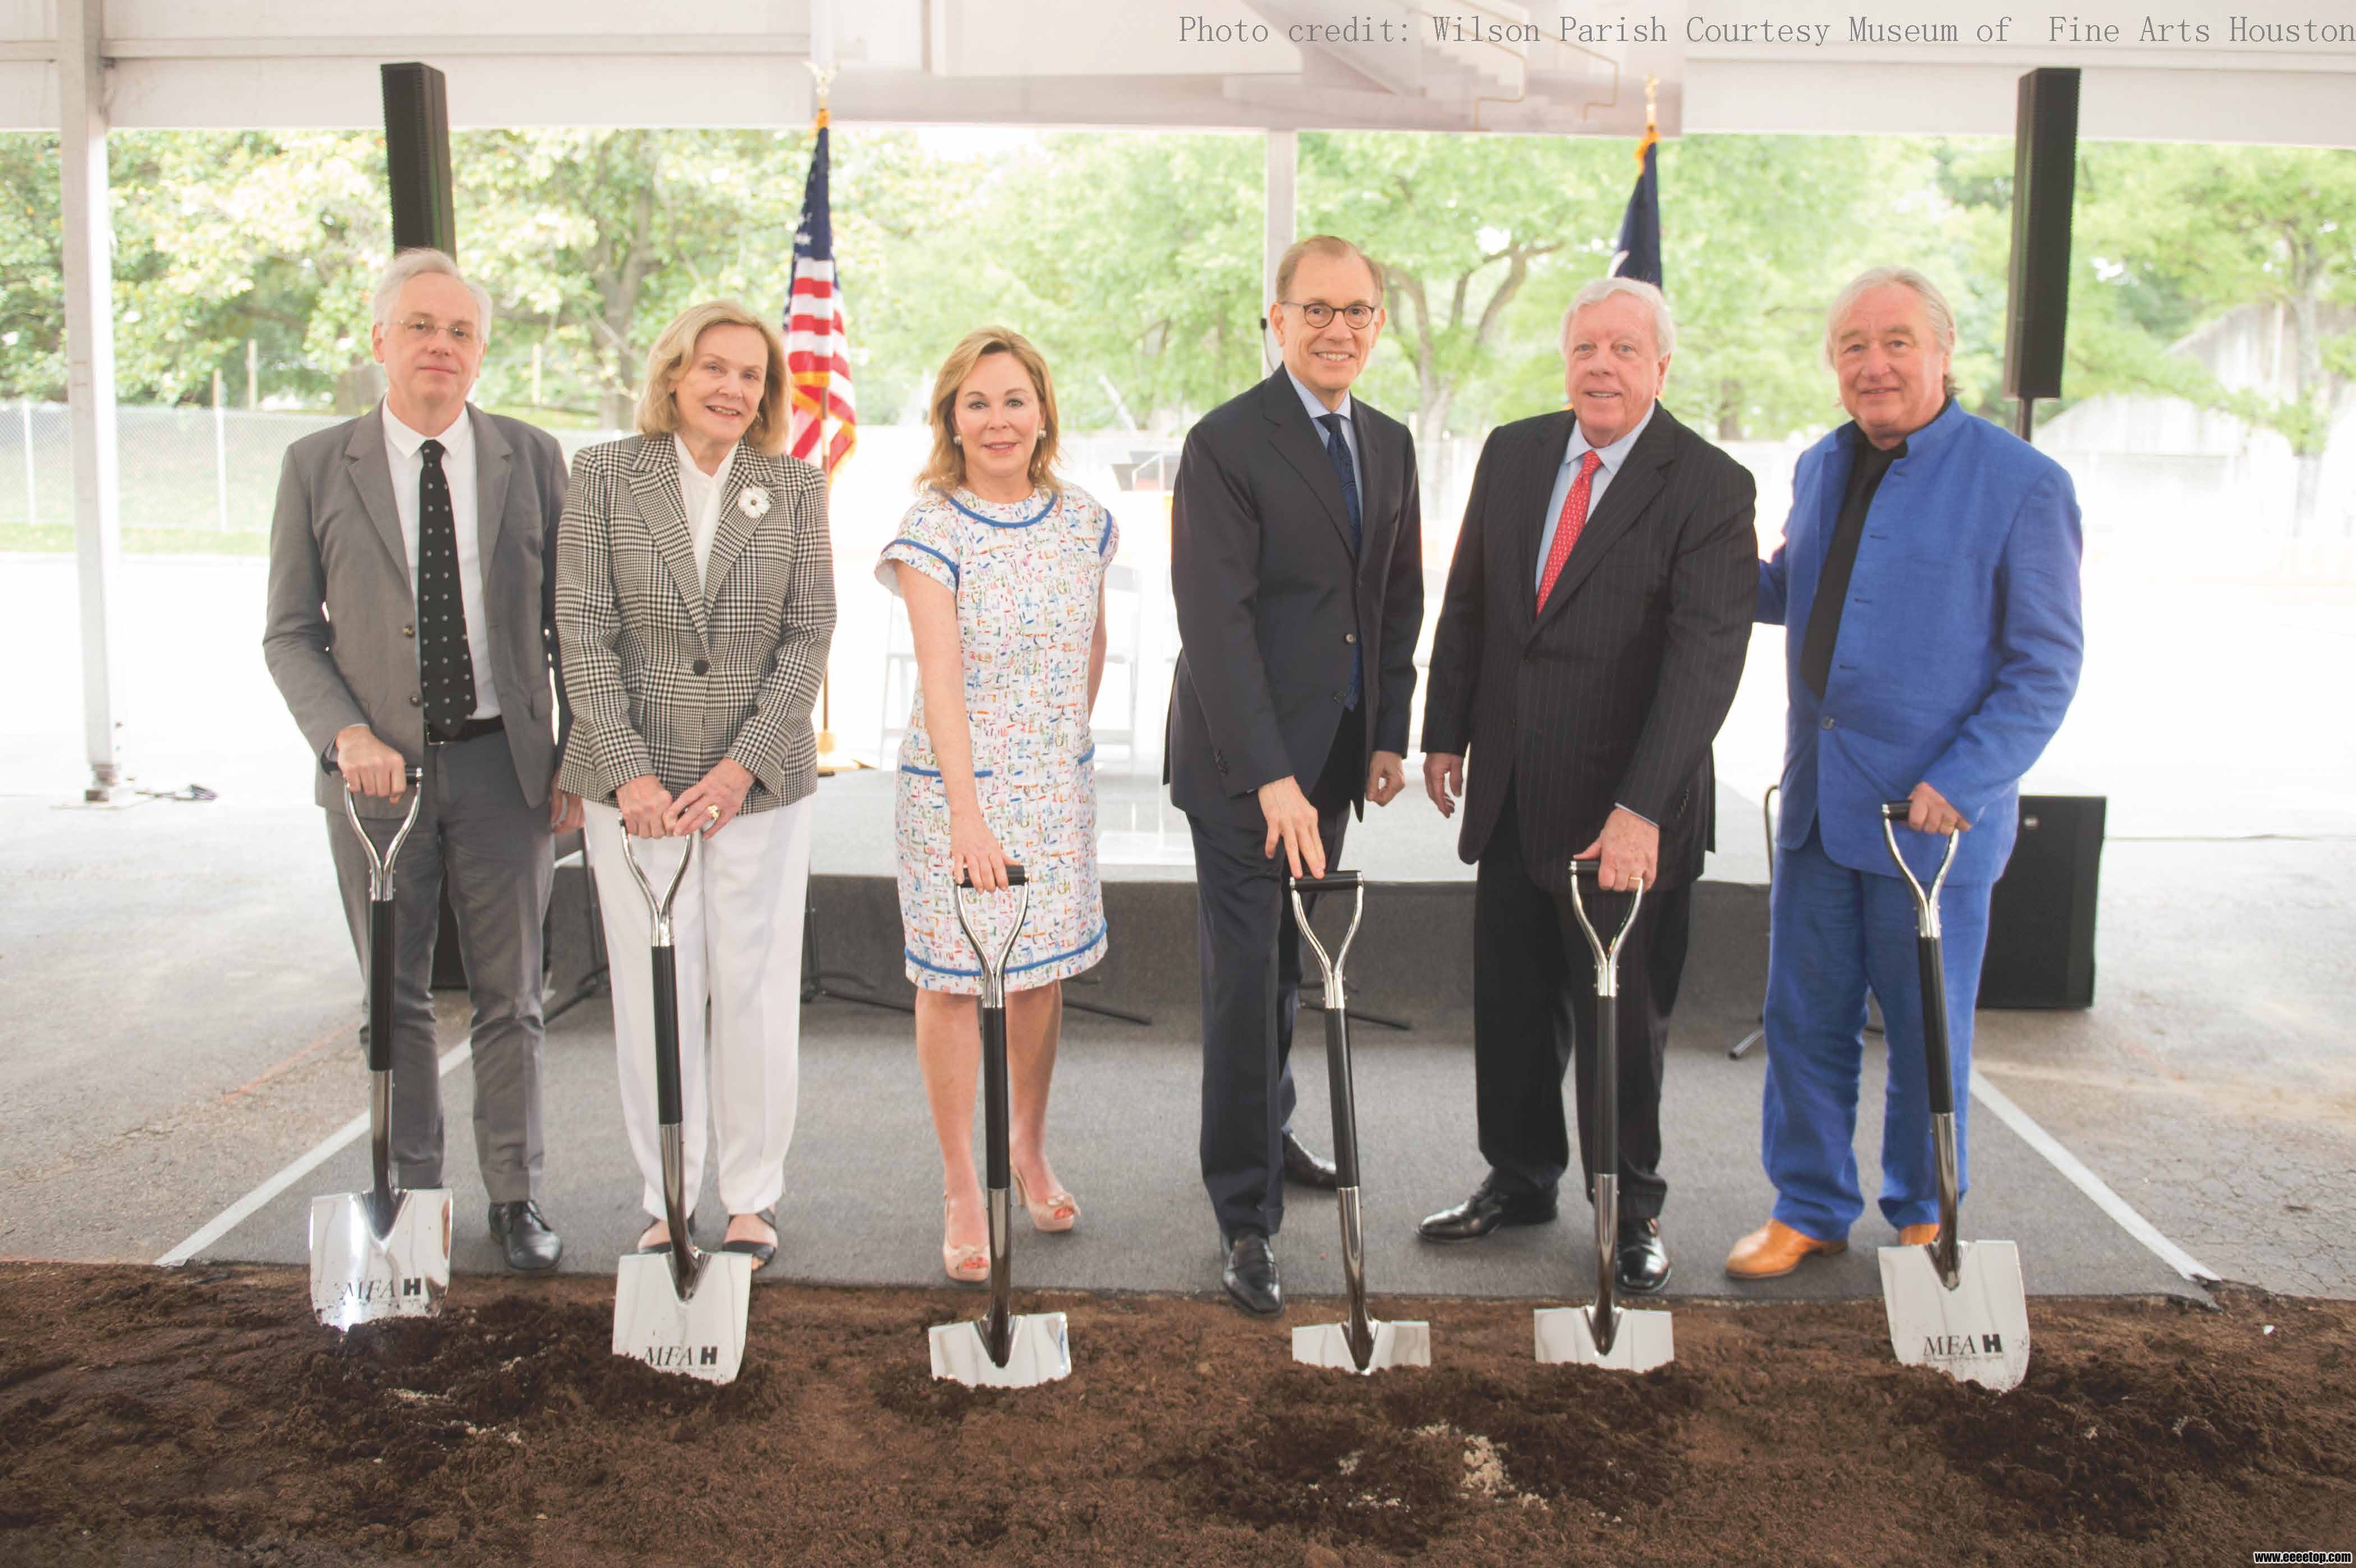 1-2 May 31, 2017 Groundbreaking for the Nancy and Rich Kinder Building - photo c.jpg